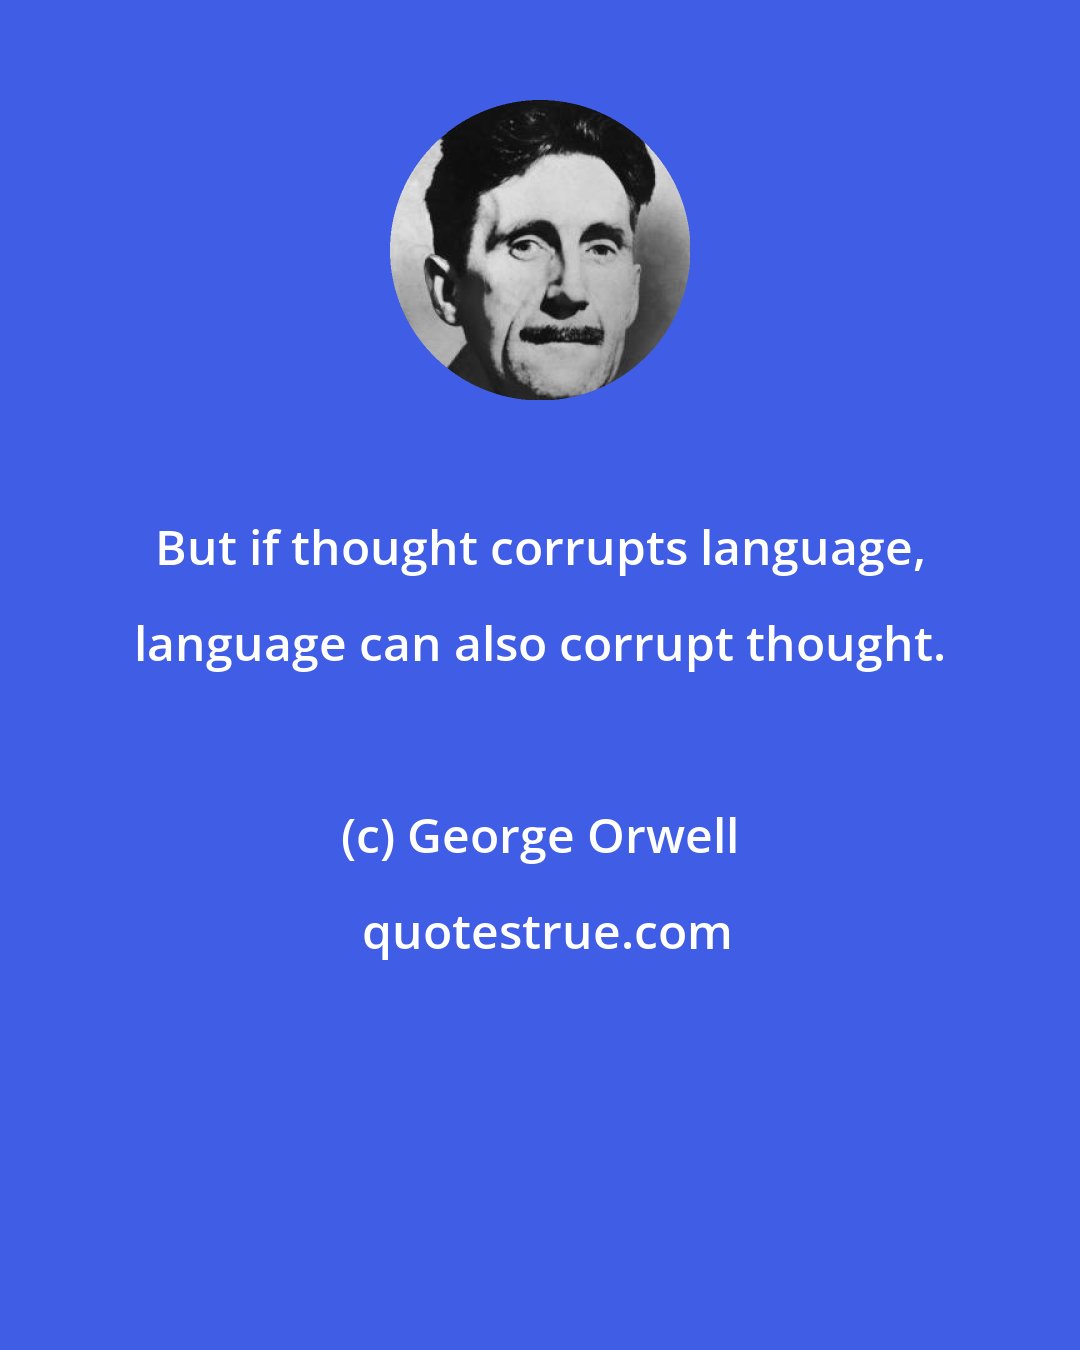 George Orwell: But if thought corrupts language, language can also corrupt thought.